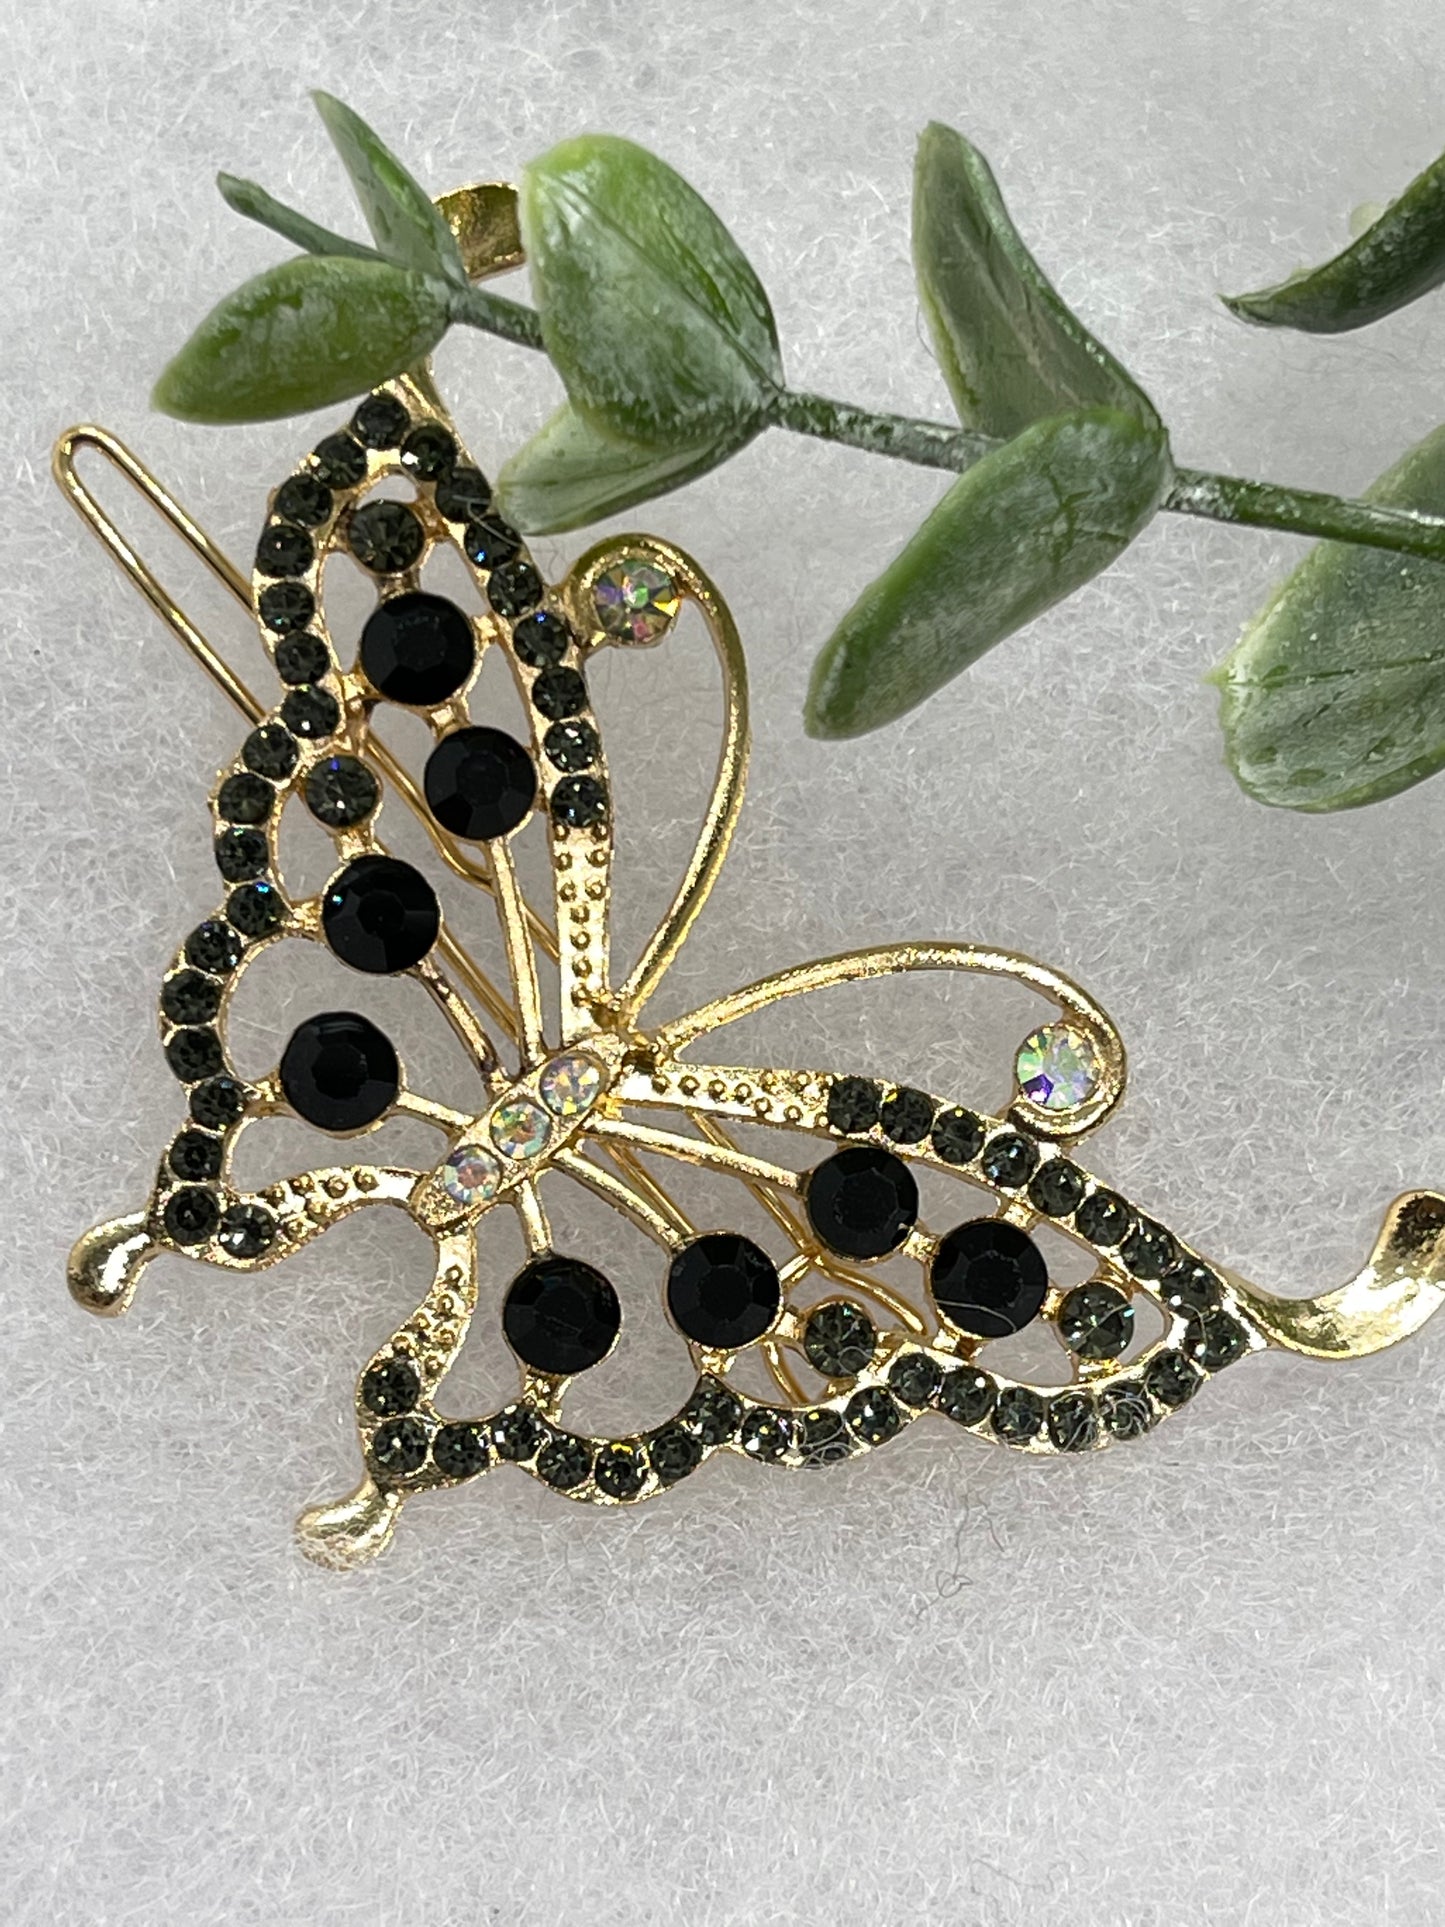 Black gold butterfly Crystal Rhinestone Barrette approximately 3.5”Metal gold tone formal hair accessory